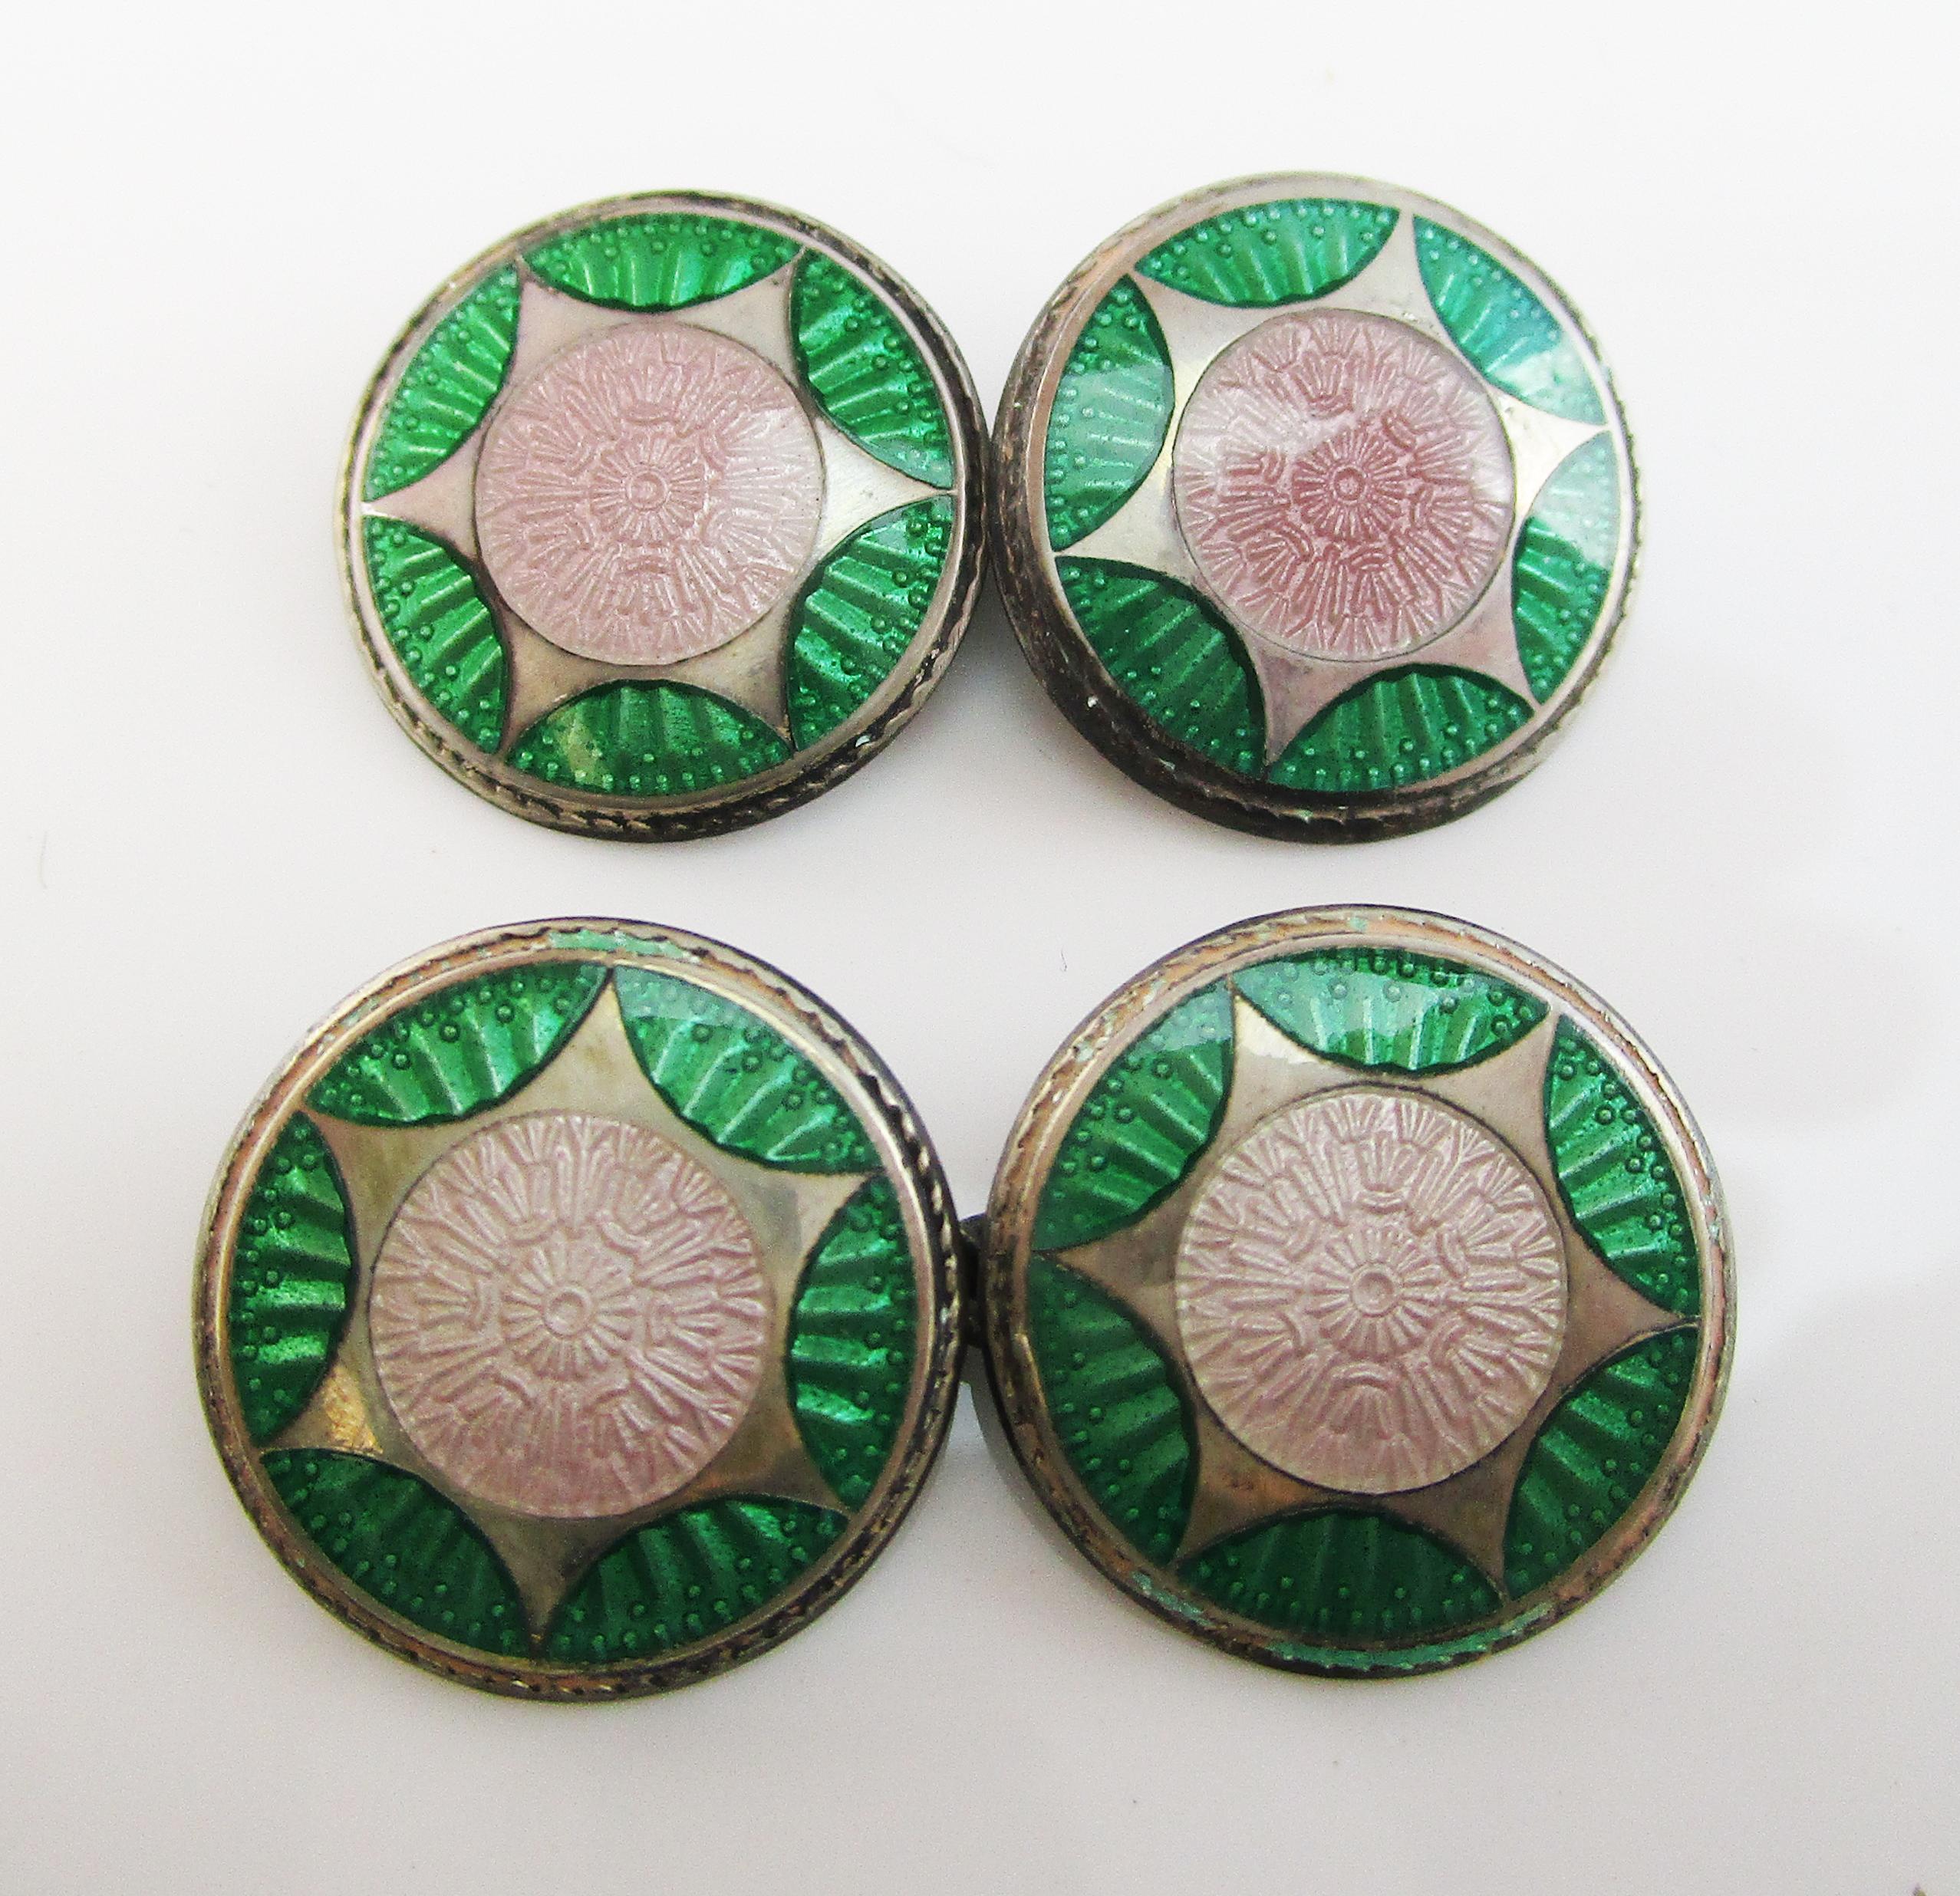 These fantastic Deco cufflinks are in sterling silver and feature an elegant round design decorated with a green and white enamel star pattern! The panels each have a six-pointed silver star surrounded by a green enamel field and filled with a white